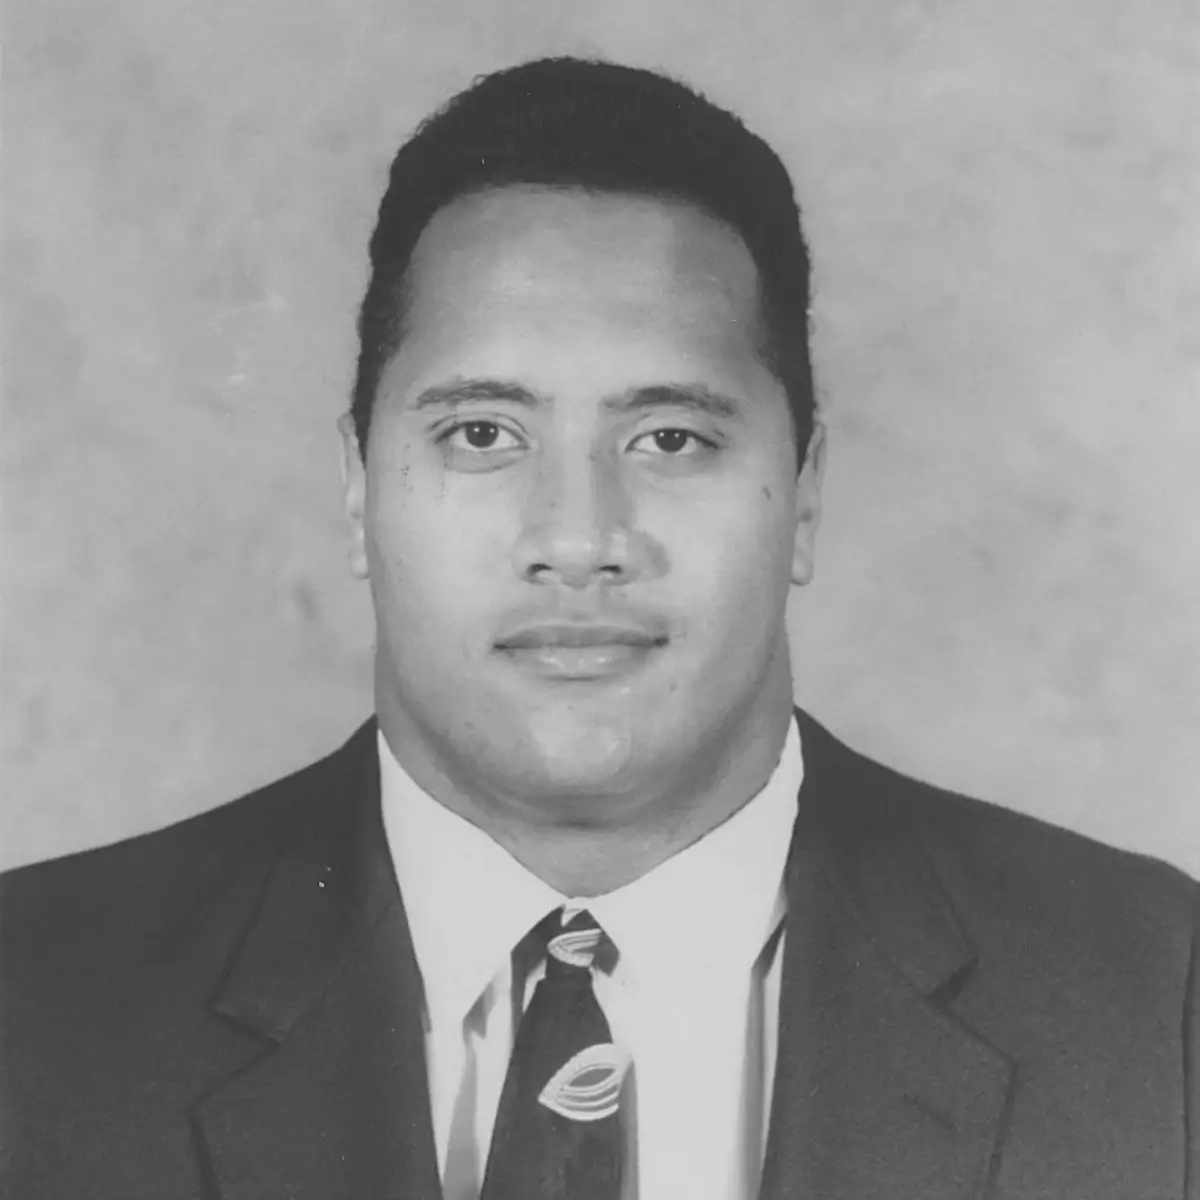 Dwayne "The Rock" Johnson's College Football Days at the University of Miami (1993)